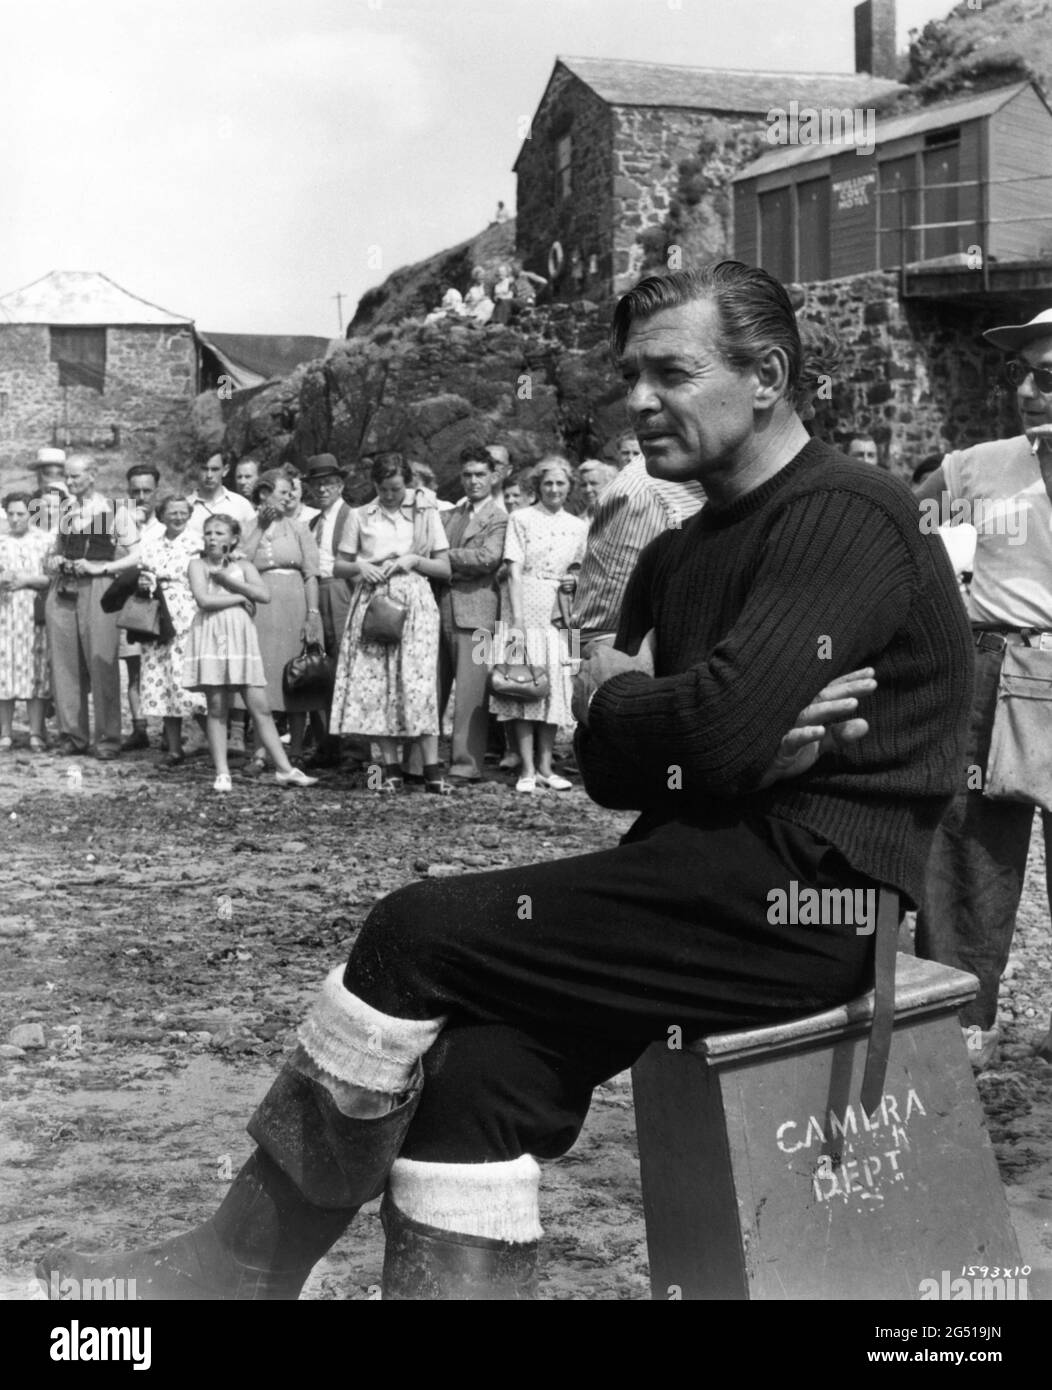 CLARK GABLE on set candid being gawped at by British Tourists during filming at Mullion Cove in Cornwall for NEVER LET ME GO 1953 director DELMER DAVES from novel Come The Dawn by Paul Winterton producer Clarence Brown Metro Goldwyn Mayer Stock Photo